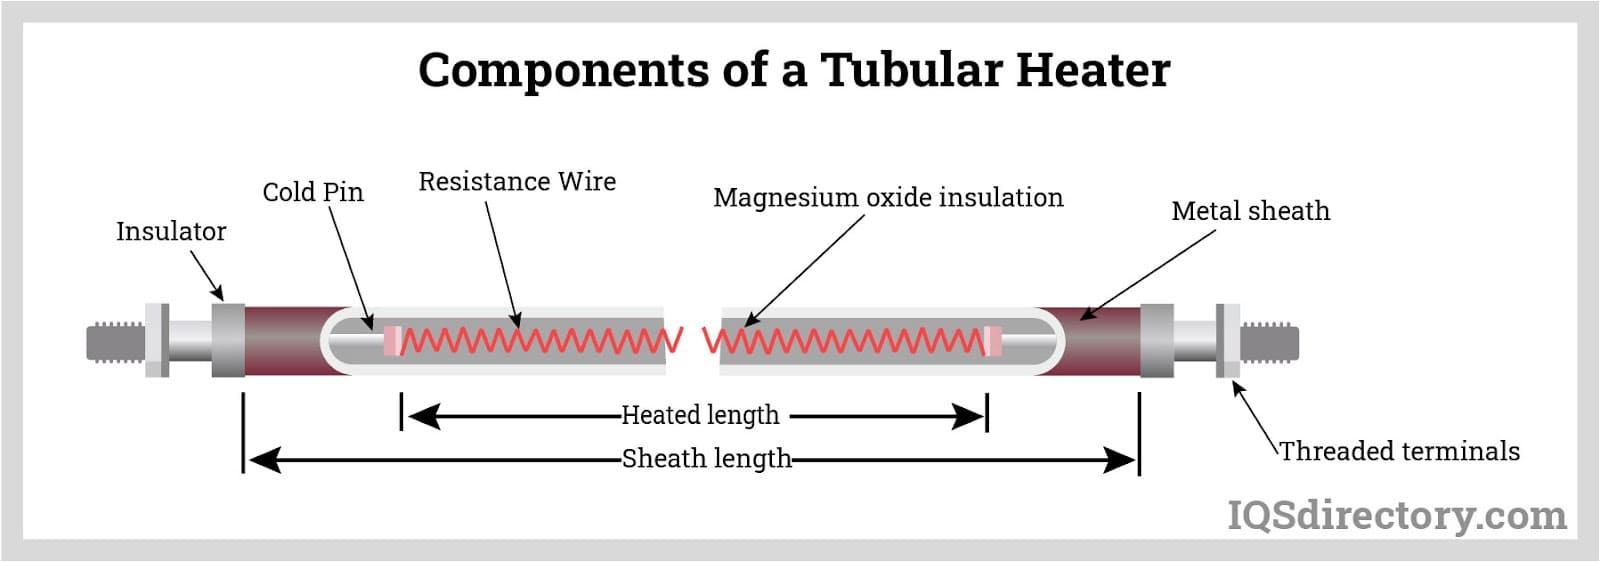 Components of a Tubular Heater